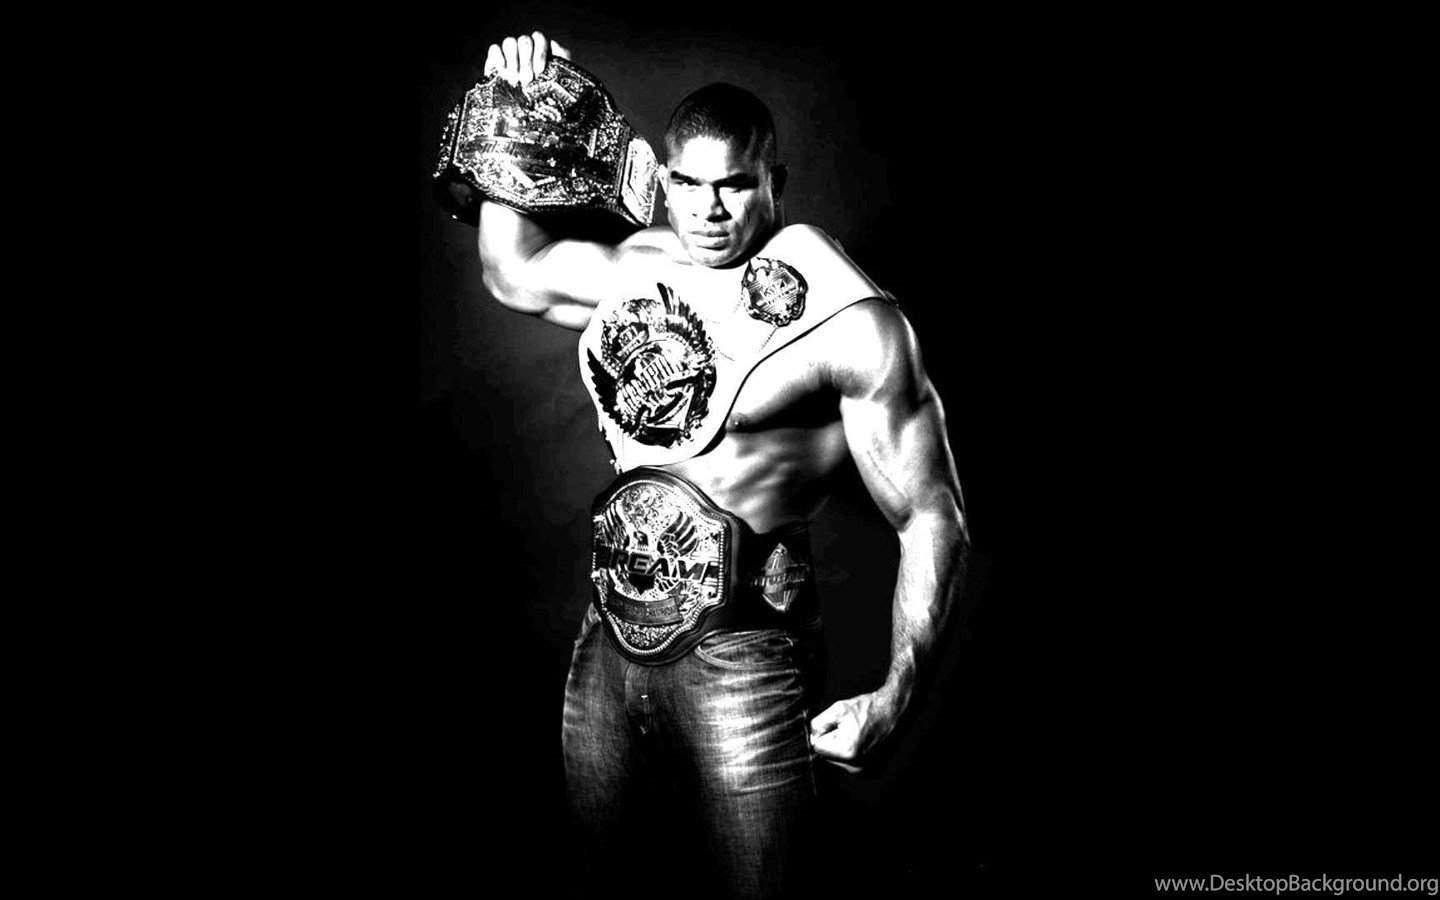 Champion Alistair Overeem Wallpapers And Images Wallpapers , HD Wallpaper & Backgrounds